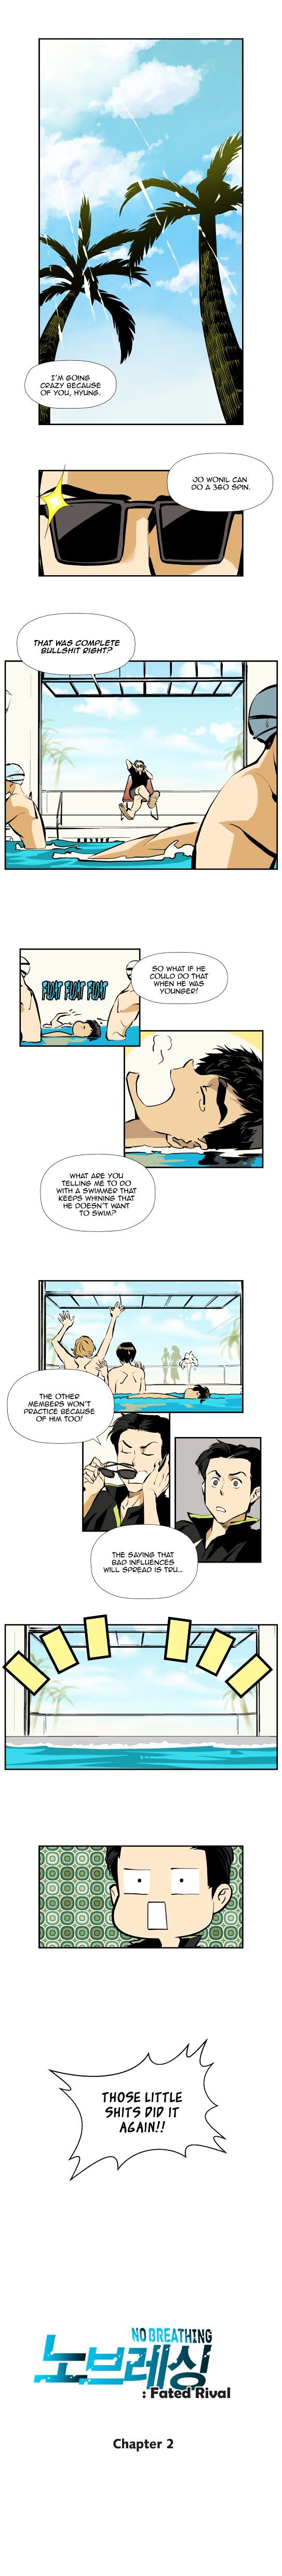 No Breathing - Page 2